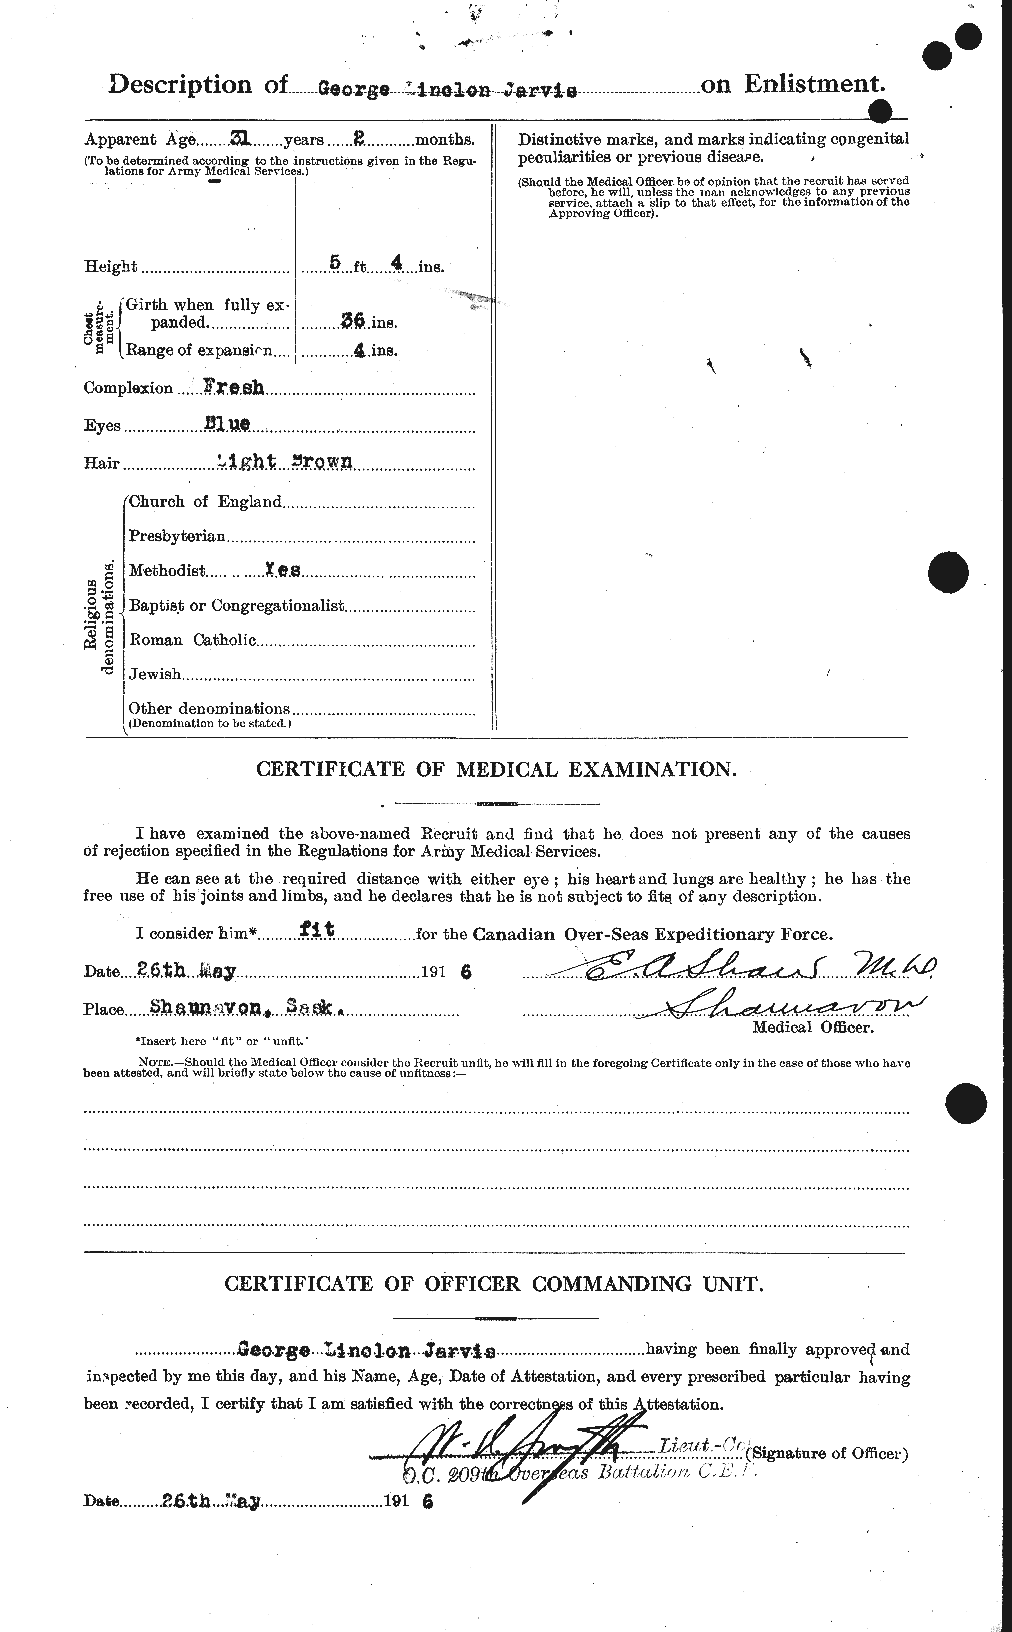 Personnel Records of the First World War - CEF 414706b